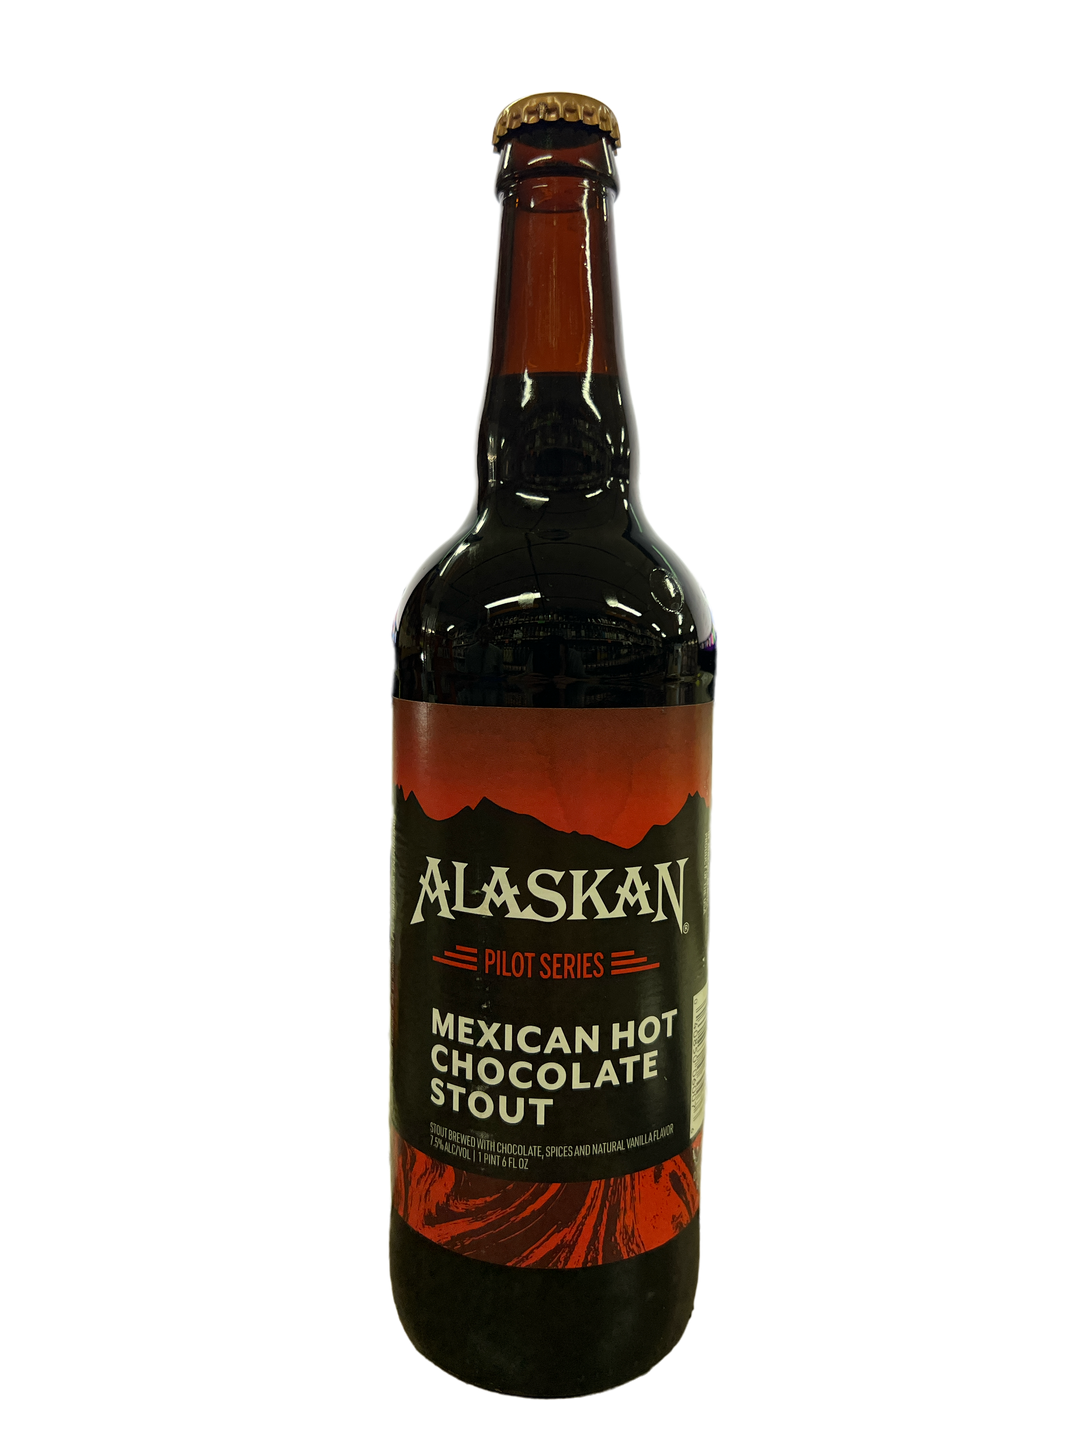 Buy Alaskan Mexican Hot Chocolate Stout Online -Craft City